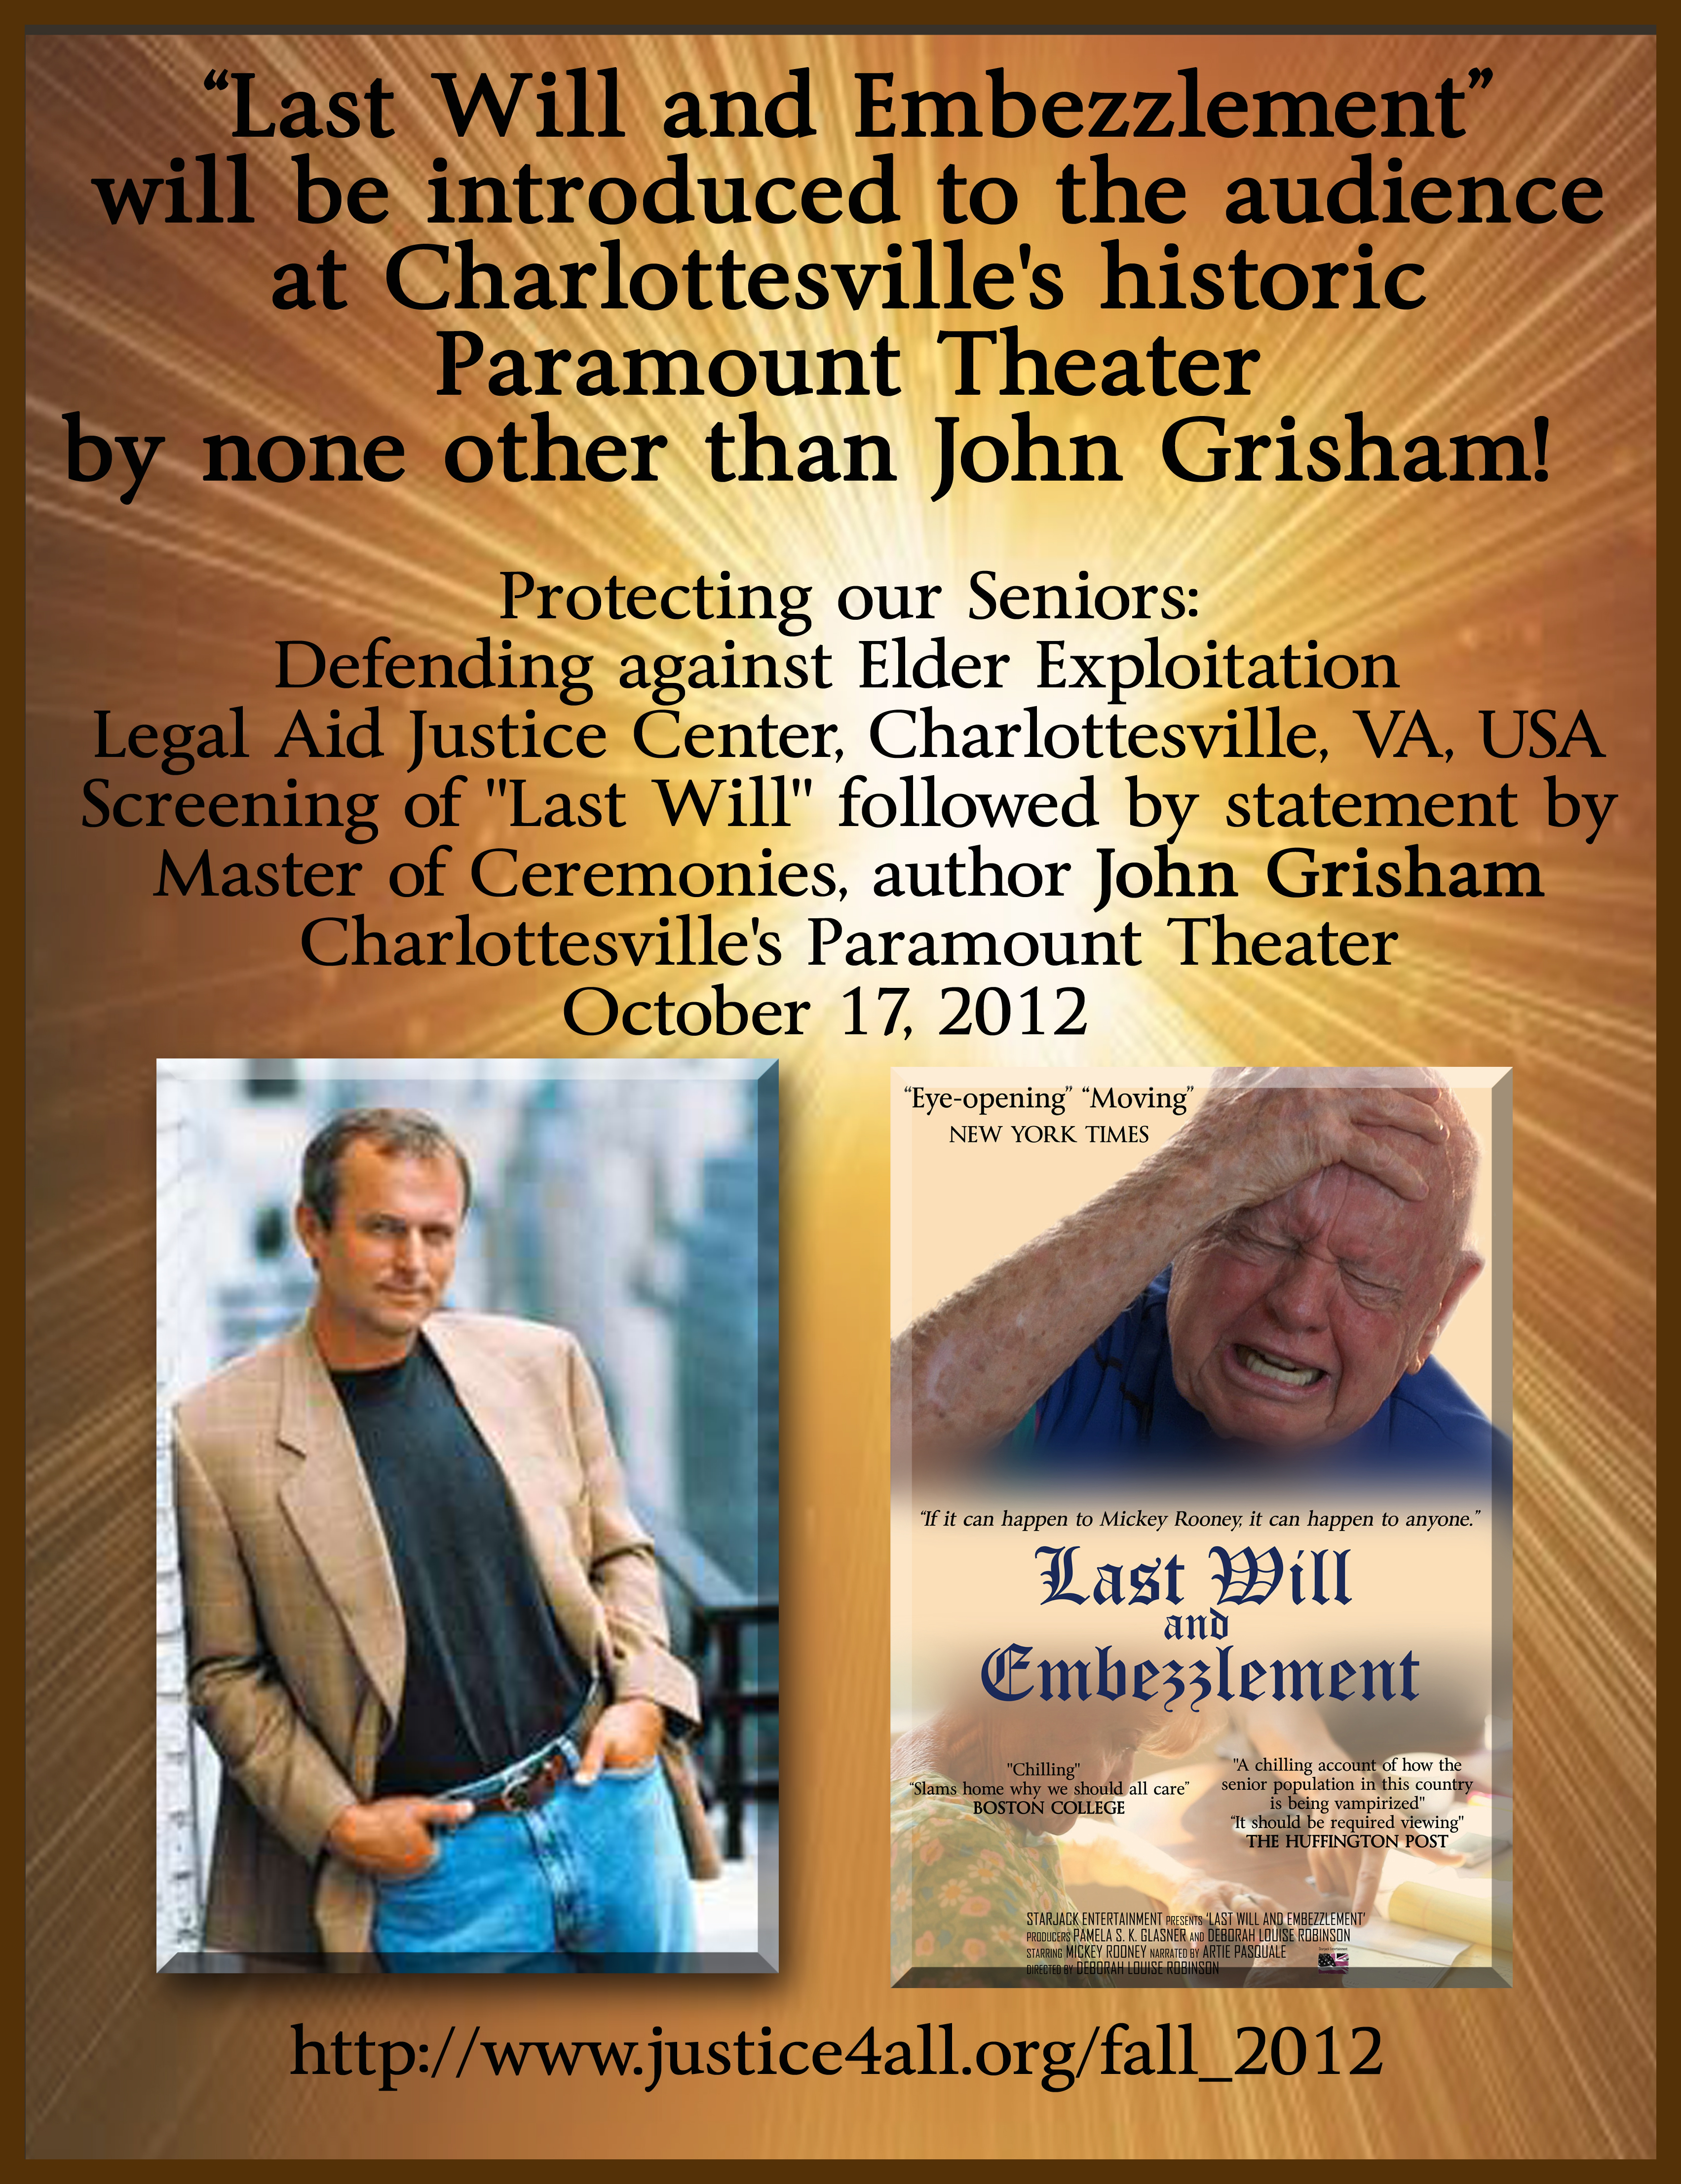 John Grisham Announcement and Introduction of 